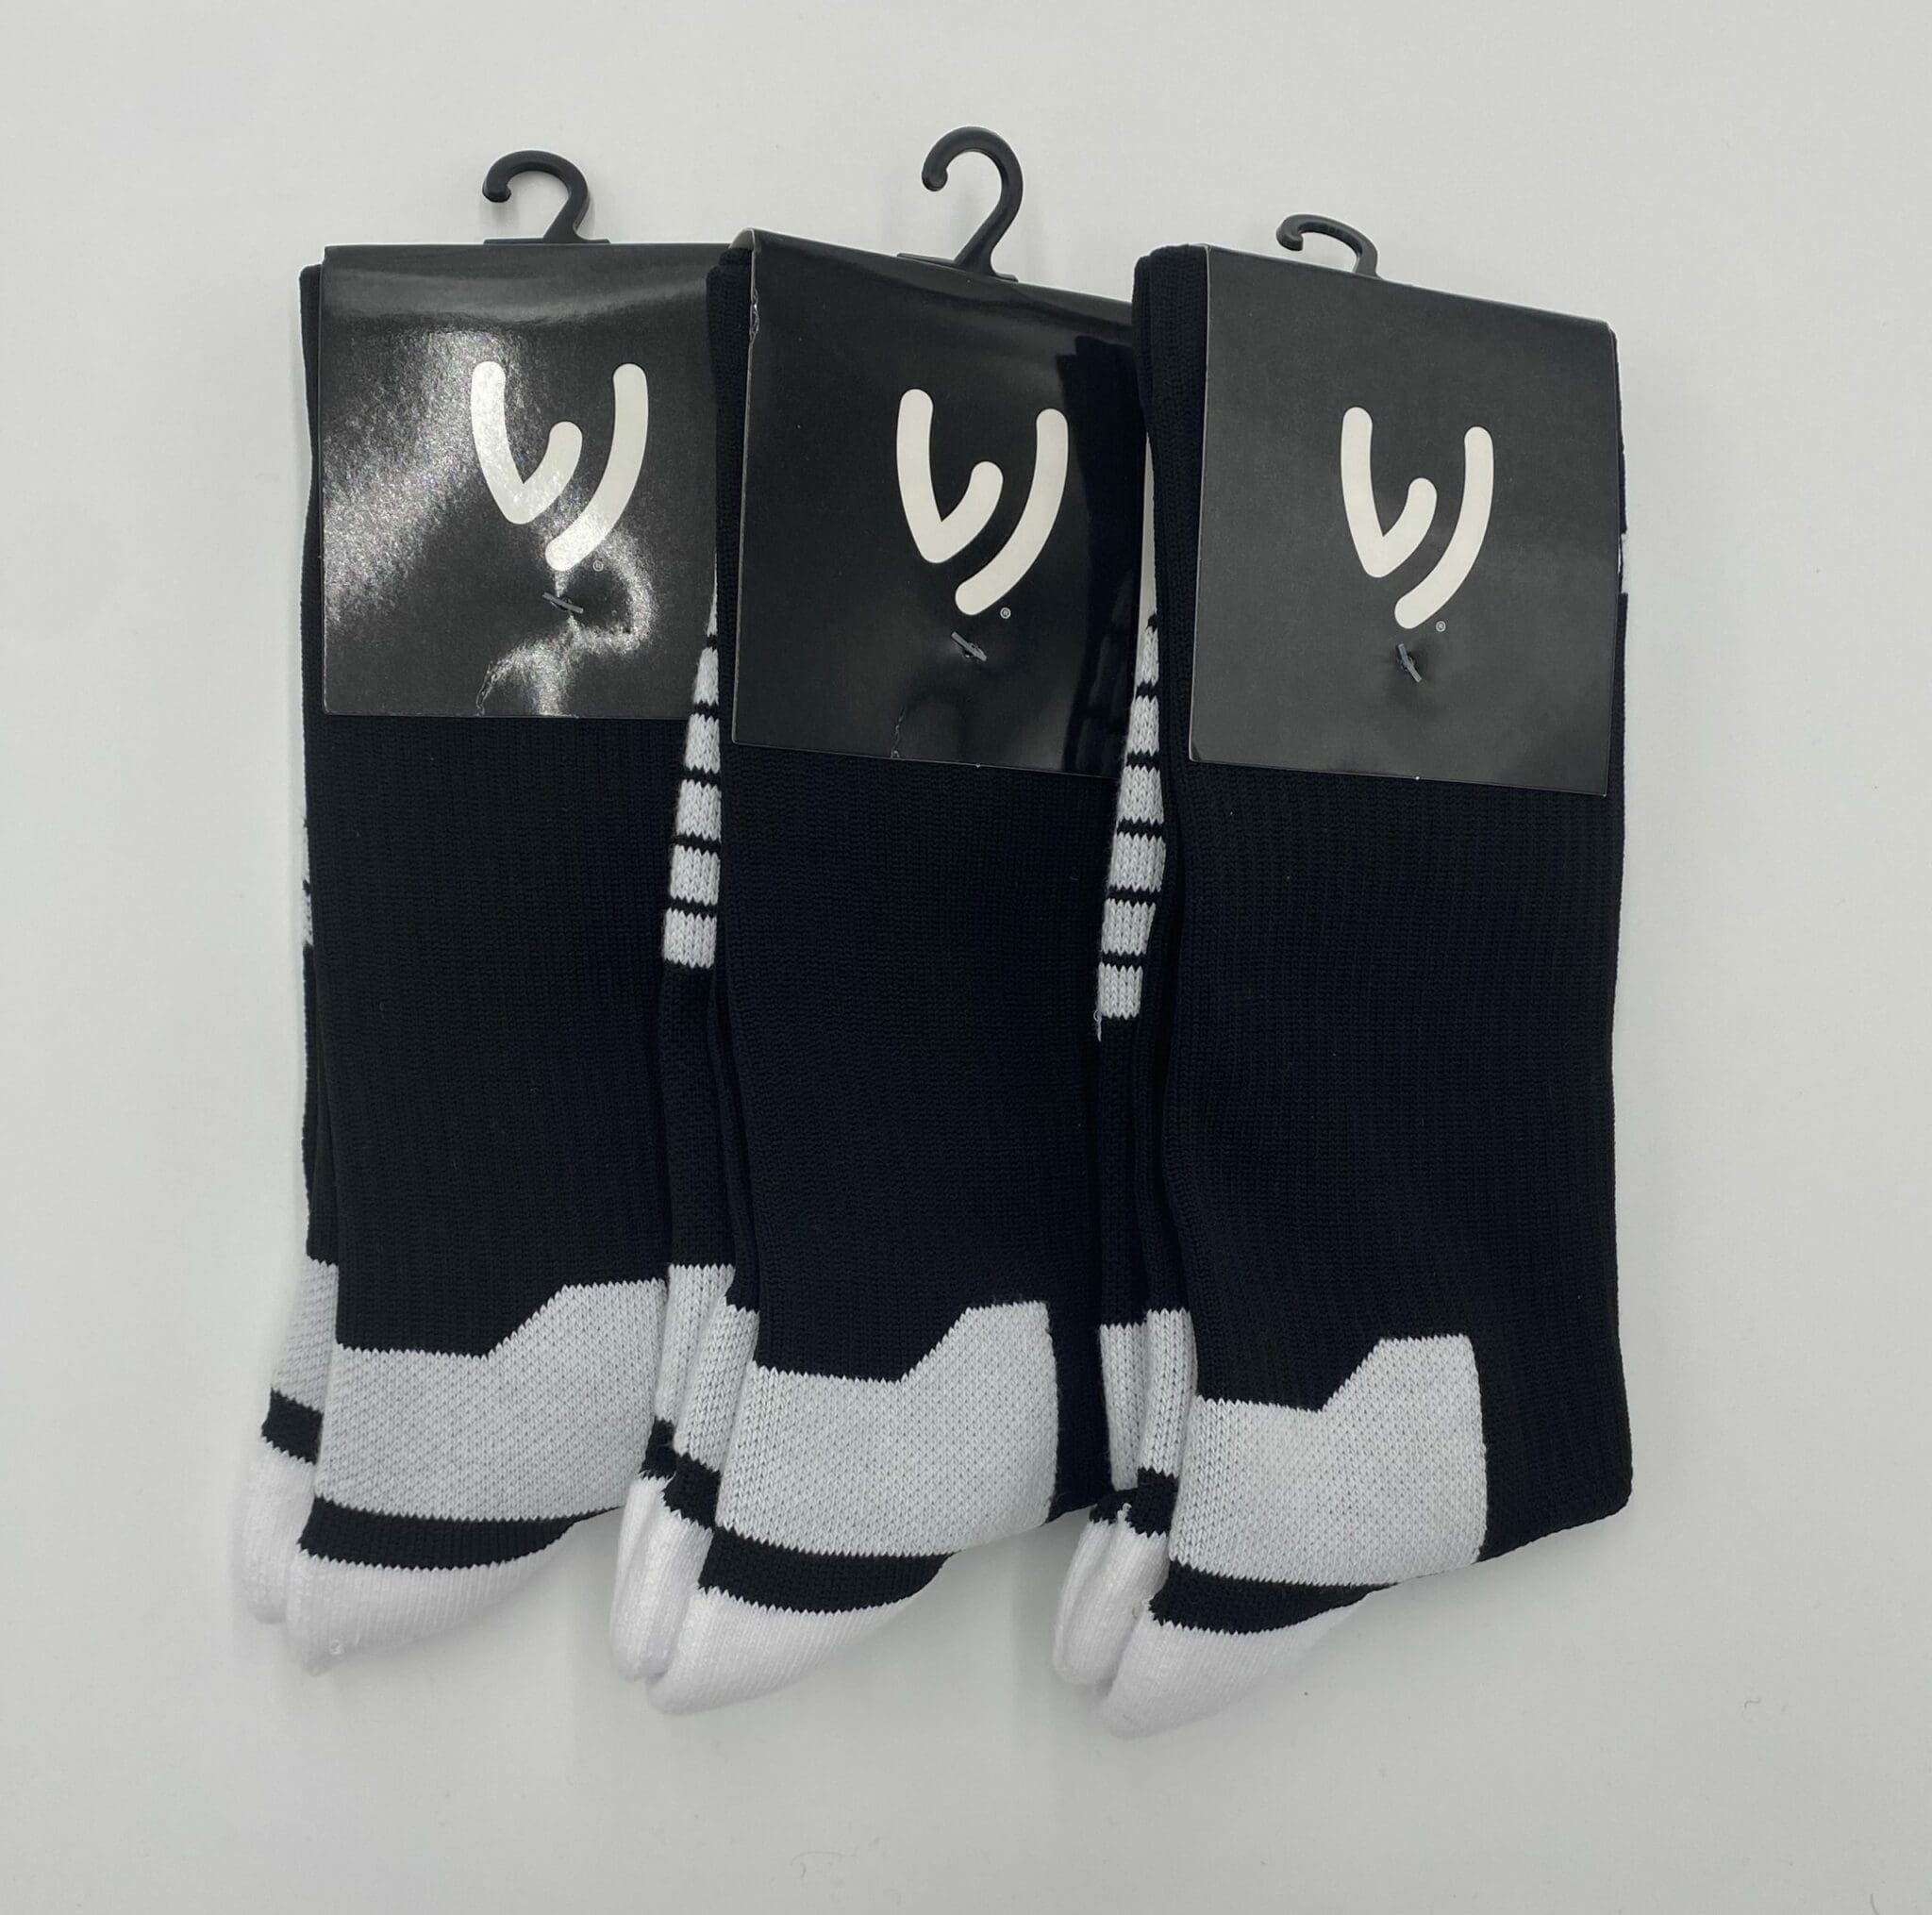 Pack Calcetines Baloncesto N/A